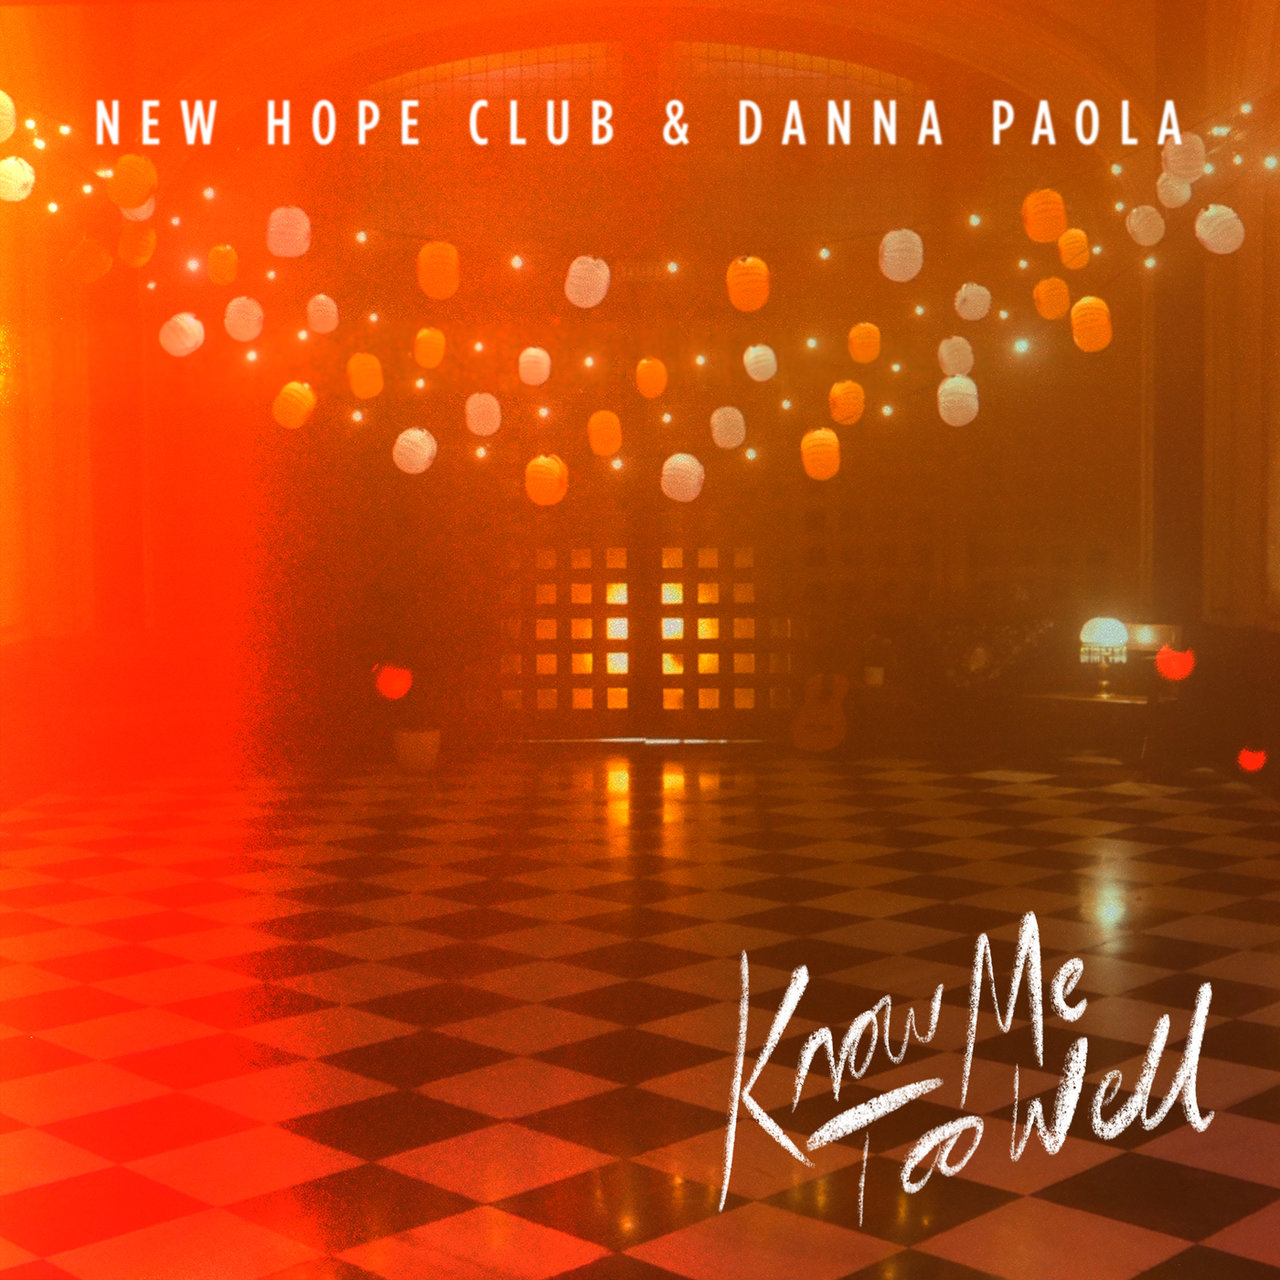 New Hope Club & Danna Paola Know Me Too Well cover artwork